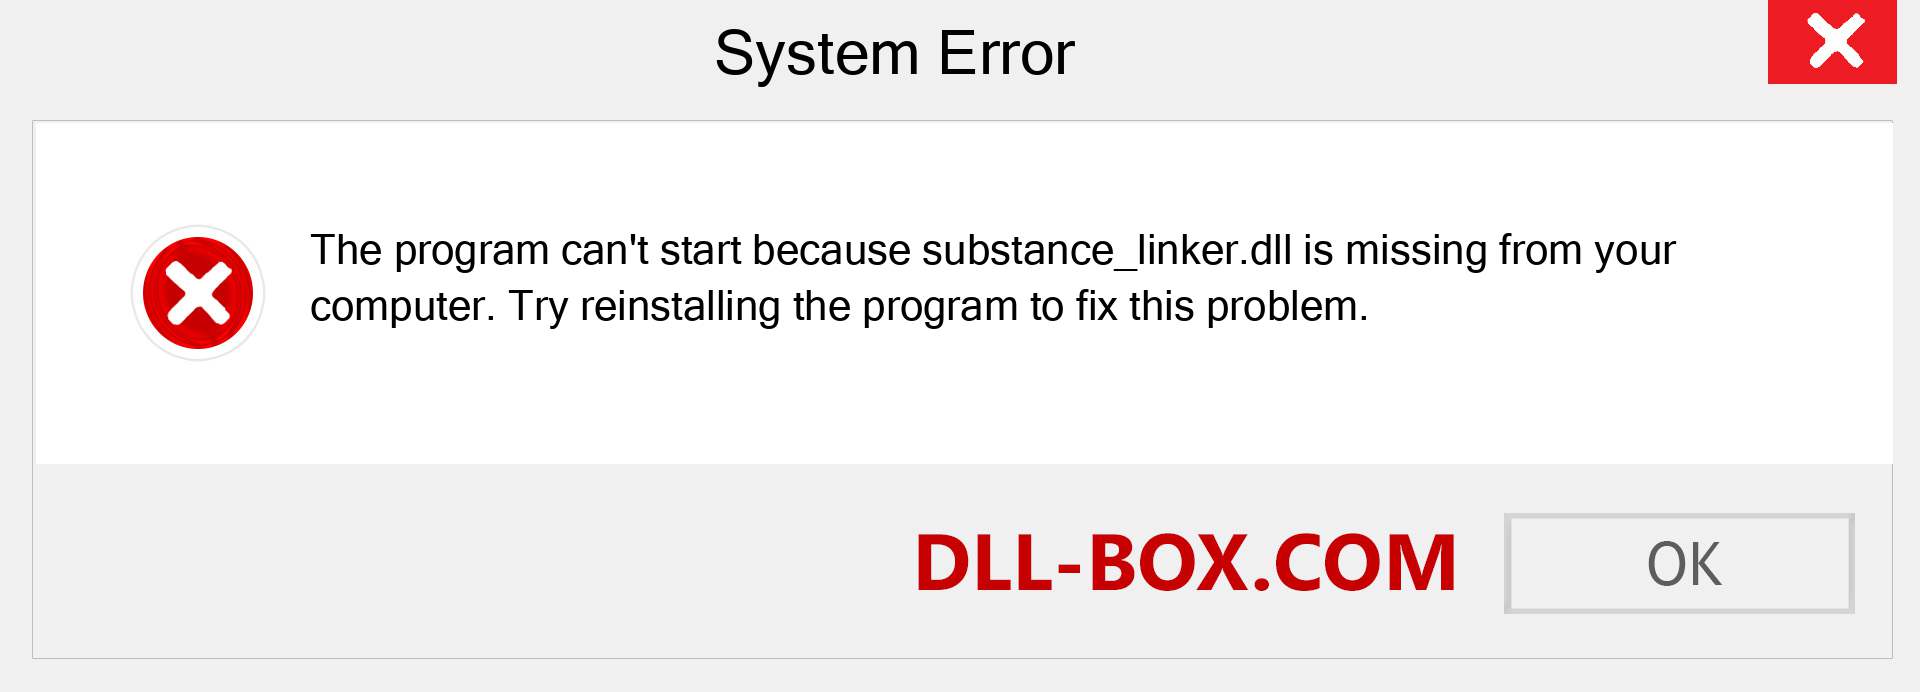  substance_linker.dll file is missing?. Download for Windows 7, 8, 10 - Fix  substance_linker dll Missing Error on Windows, photos, images